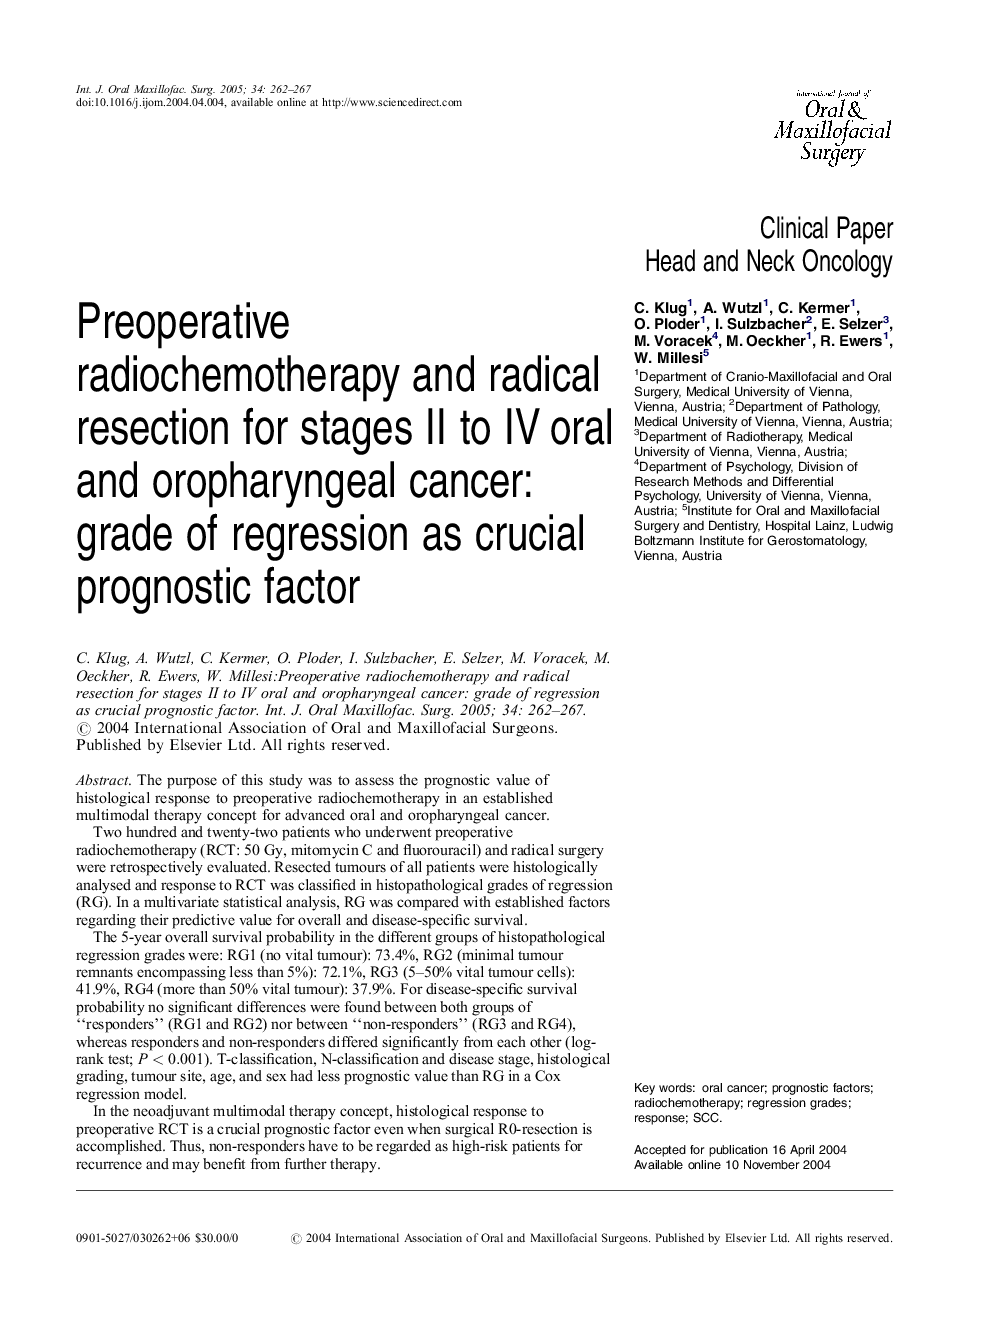 Preoperative radiochemotherapy and radical resection for stages II to IV oral and oropharyngeal cancer: grade of regression as crucial prognostic factor